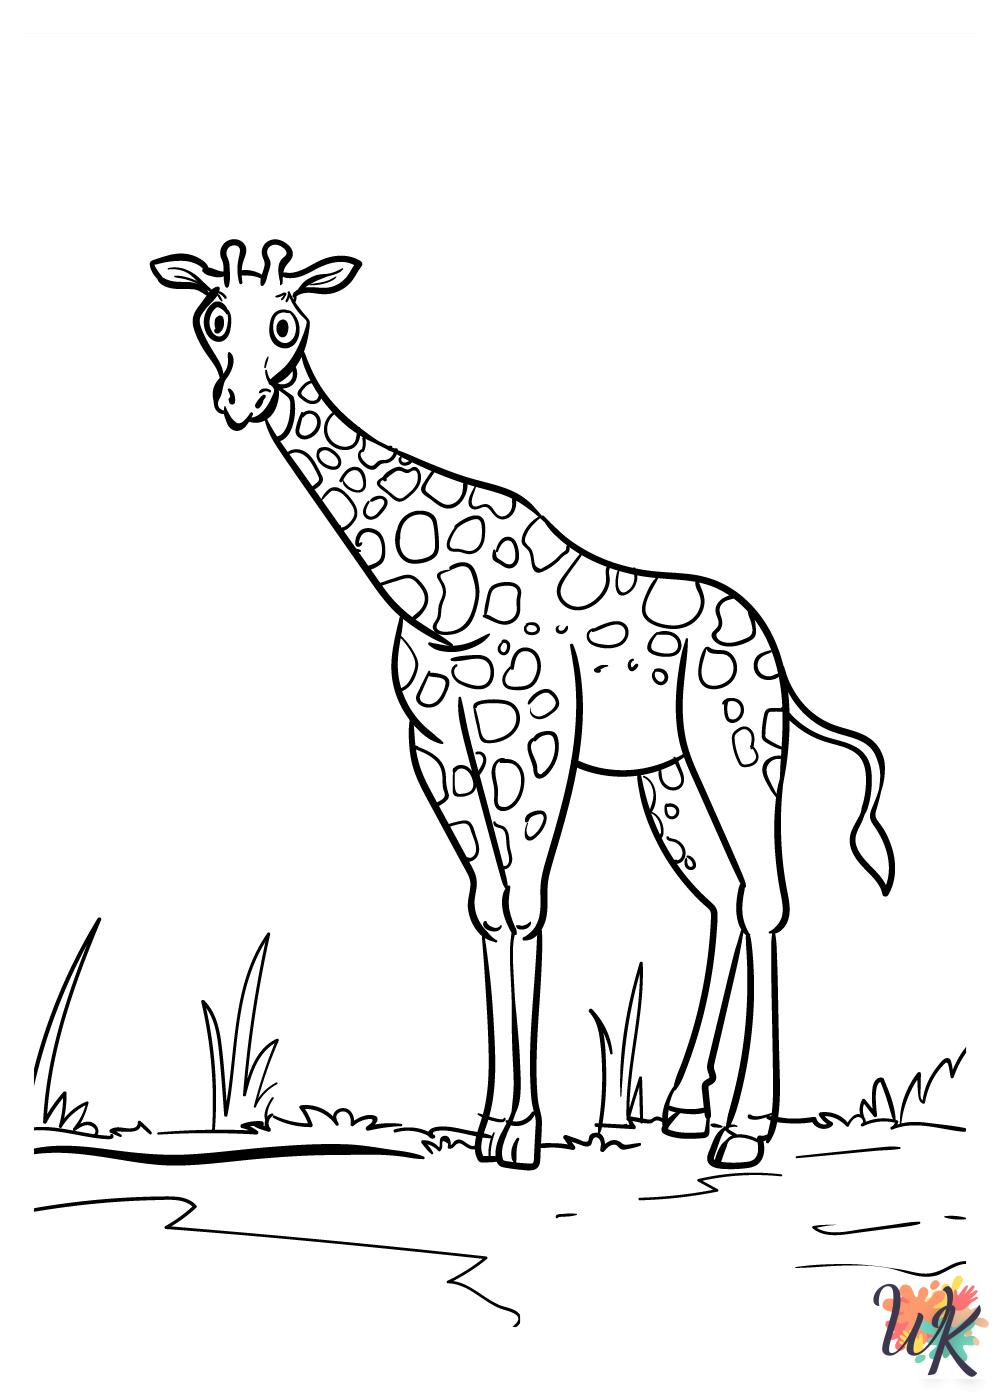 detailed Giraffe coloring pages for adults